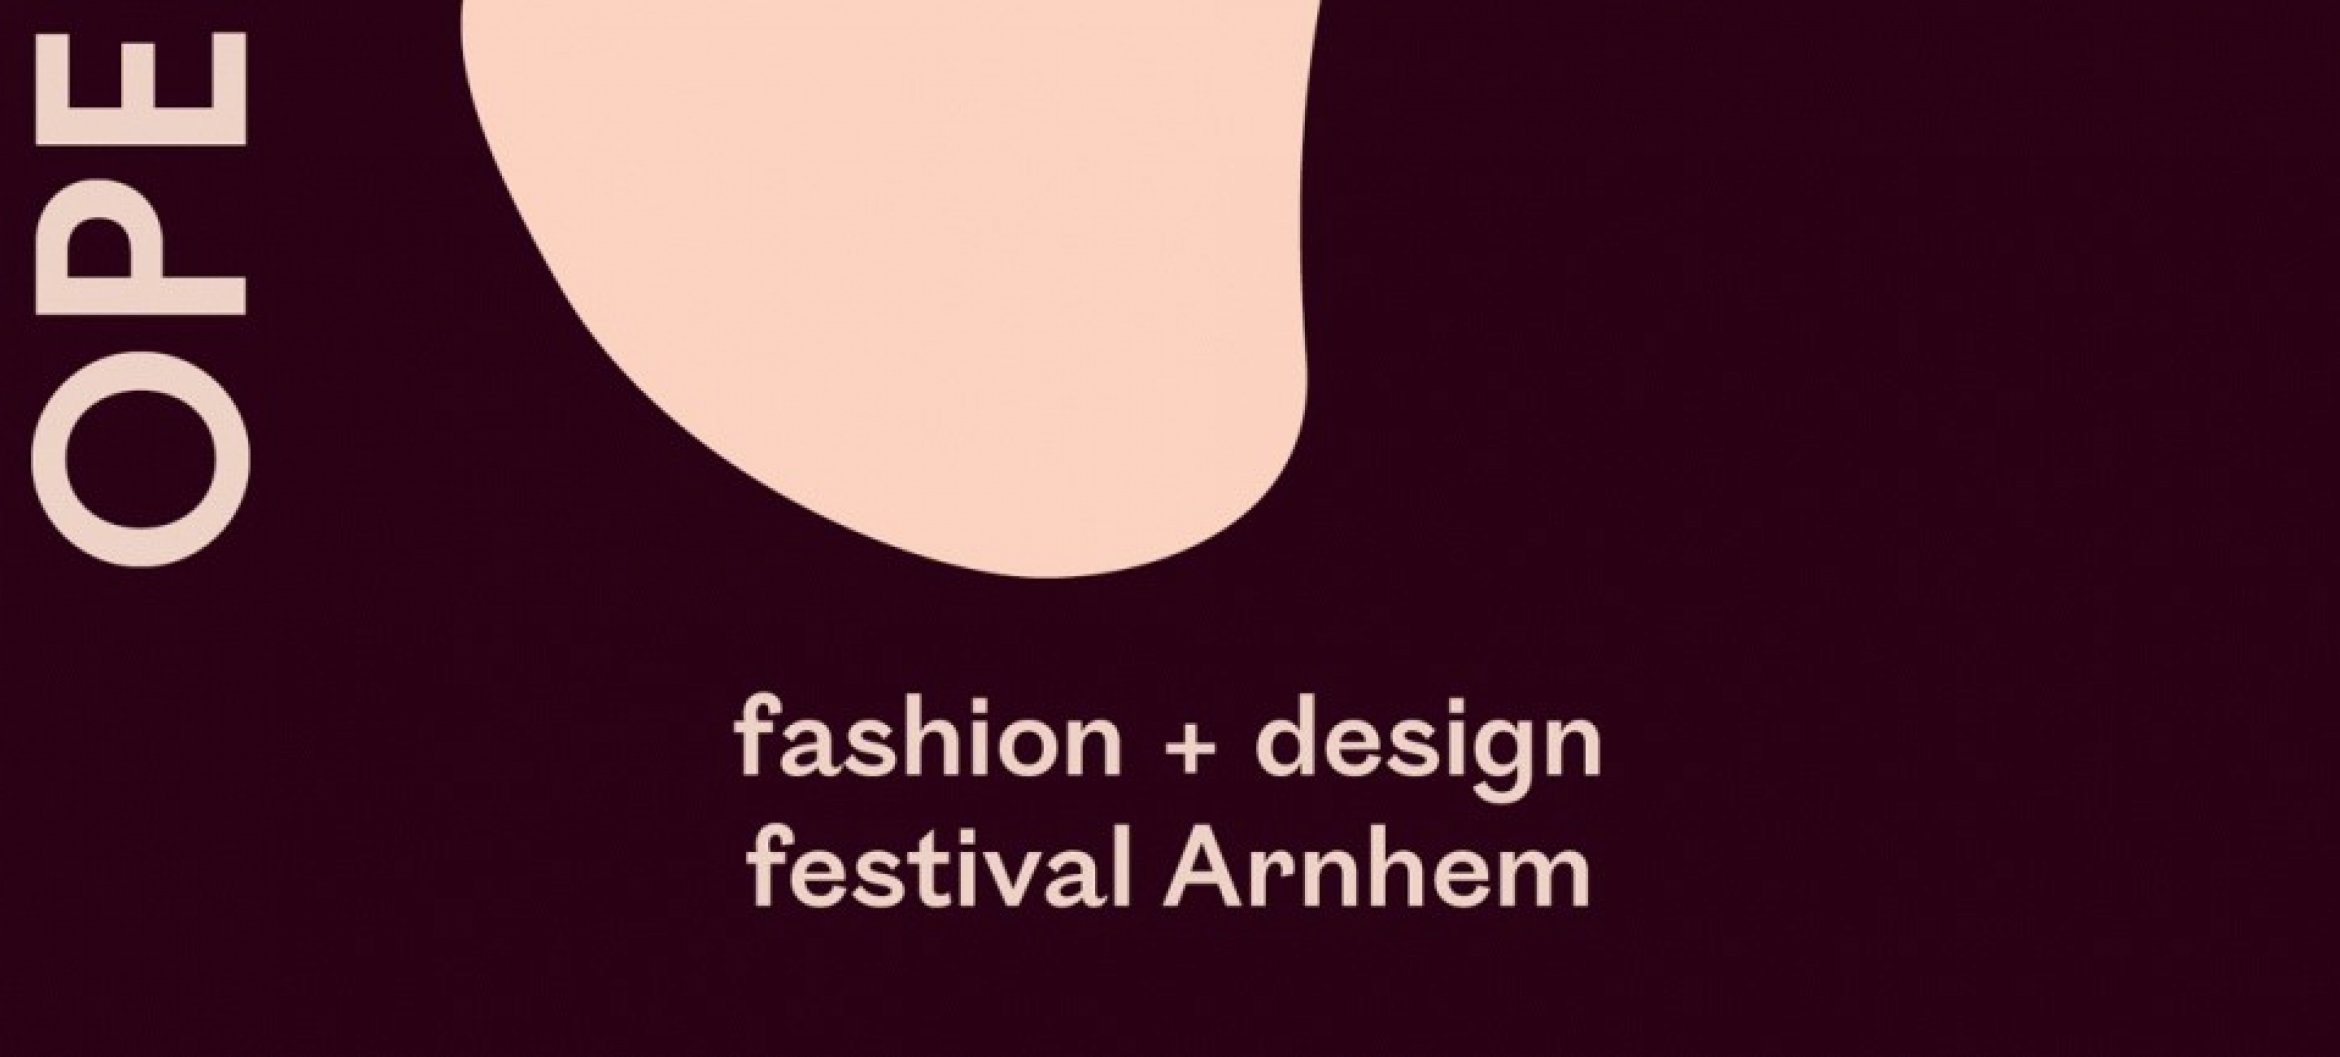 FDFA’22 is looking for designers who want to present an installation in June about their vision on the values of fashion and/or design.